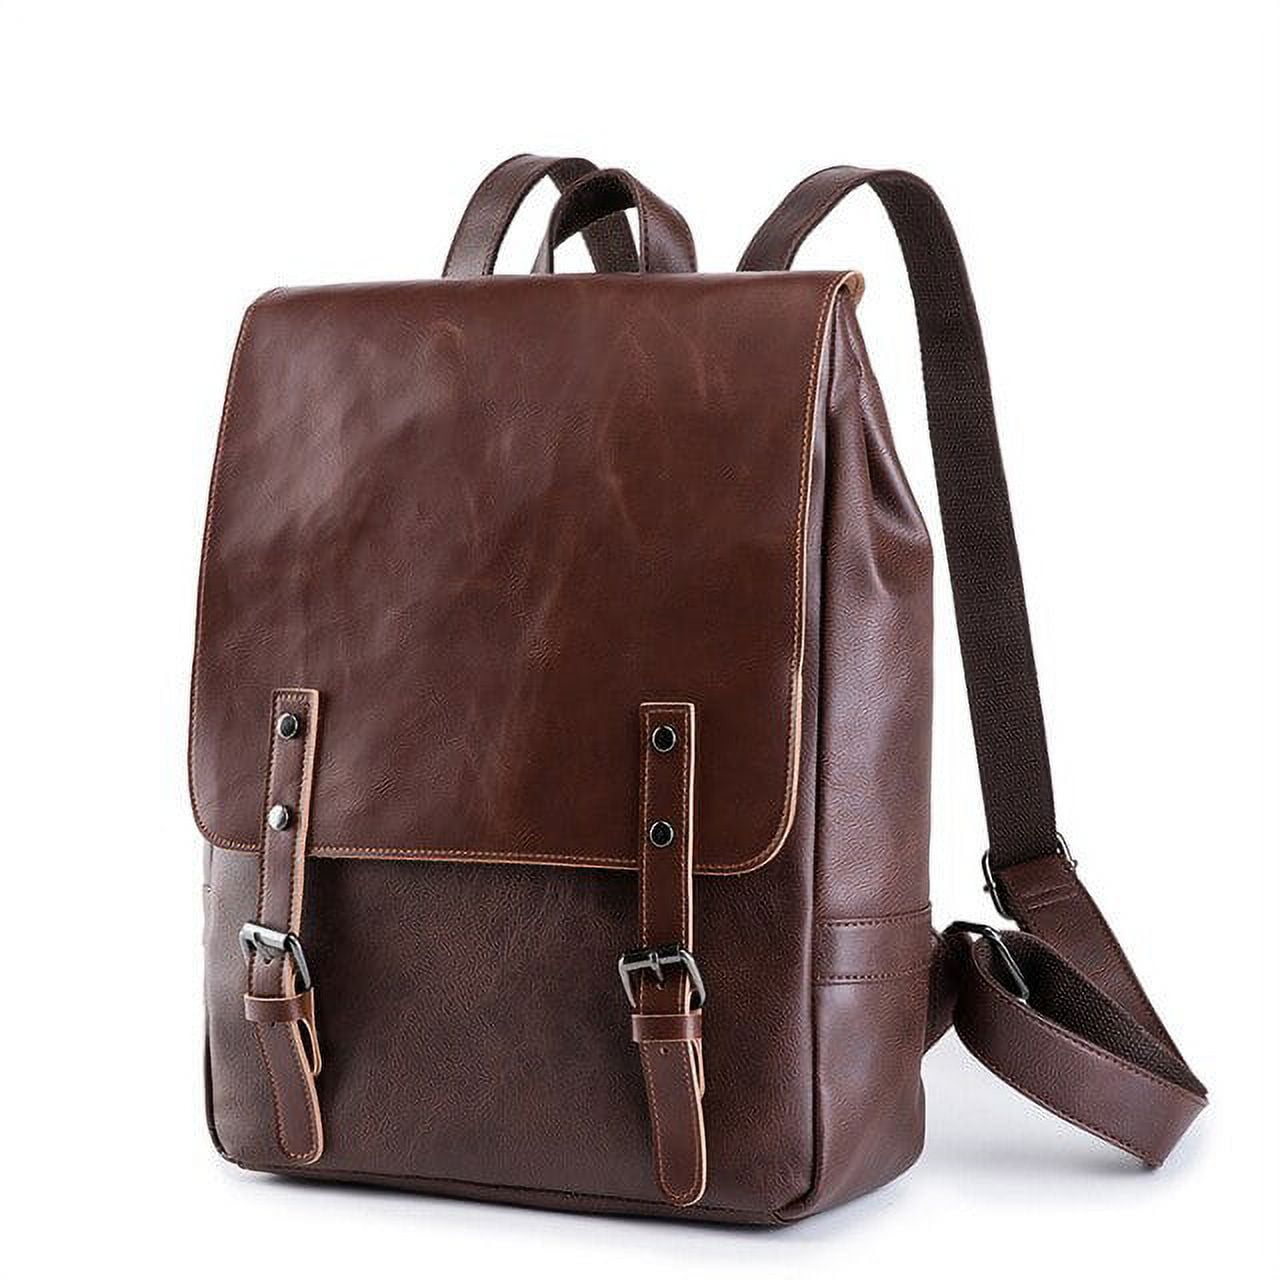 2023 Fashion Waterproof Pu Fitness Handbag, For Men Leather Shoulder Bag.  Business Large Travel Duffle Luggage Bag For Male,Classical Bag,Leather Travel  Bag, for Outdoor or Travel